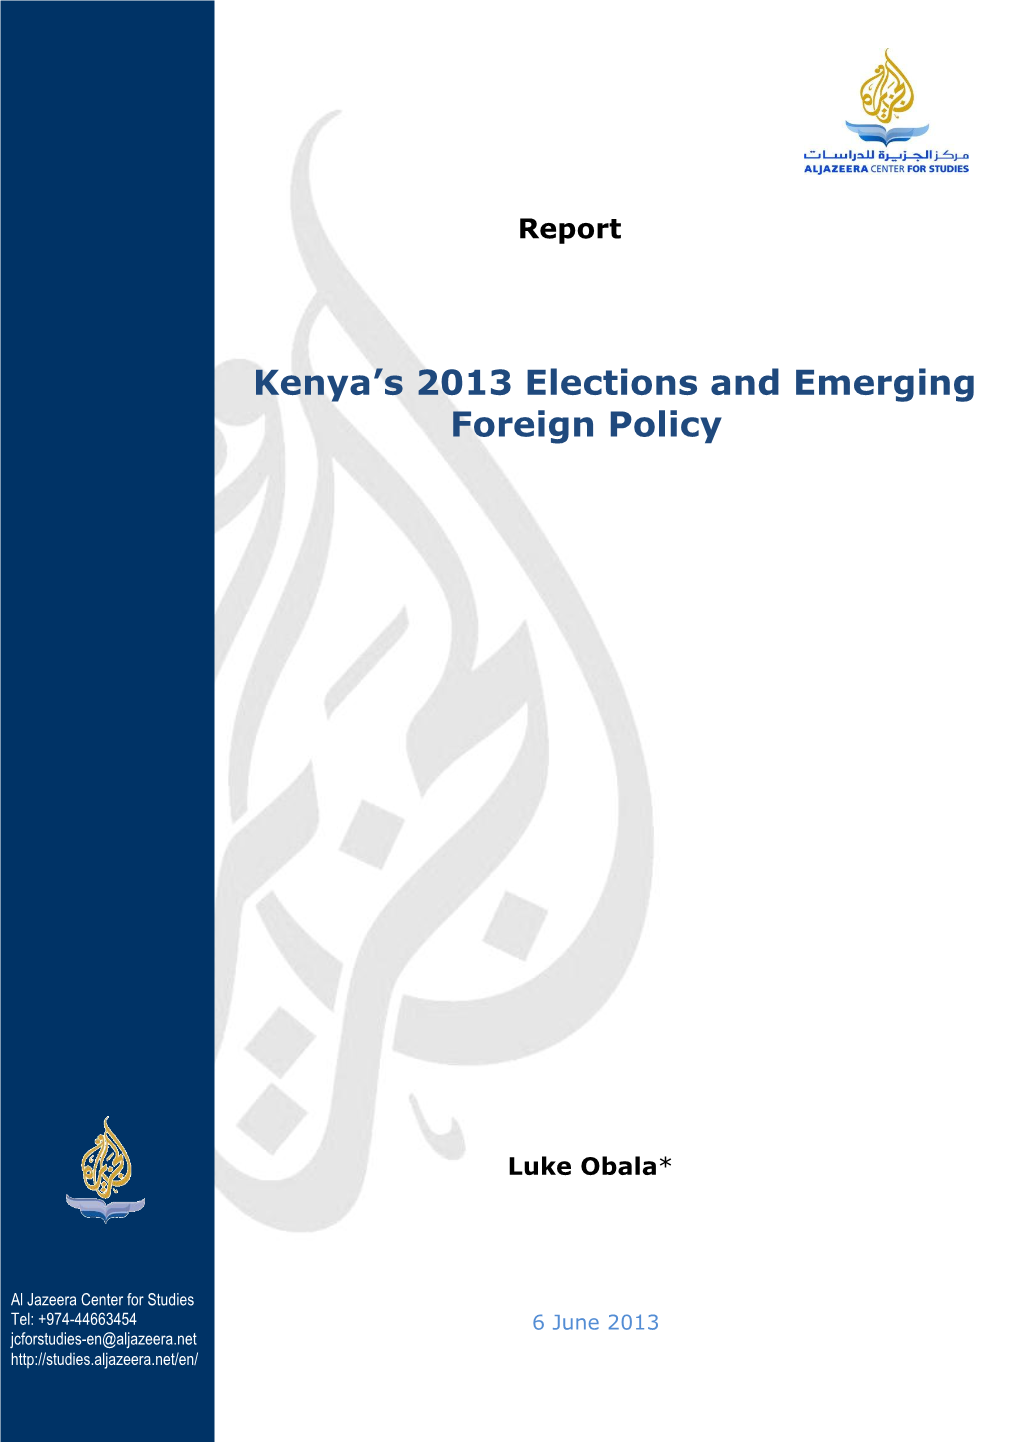 Kenya's 2013 Elections and Emerging Foreign Policy